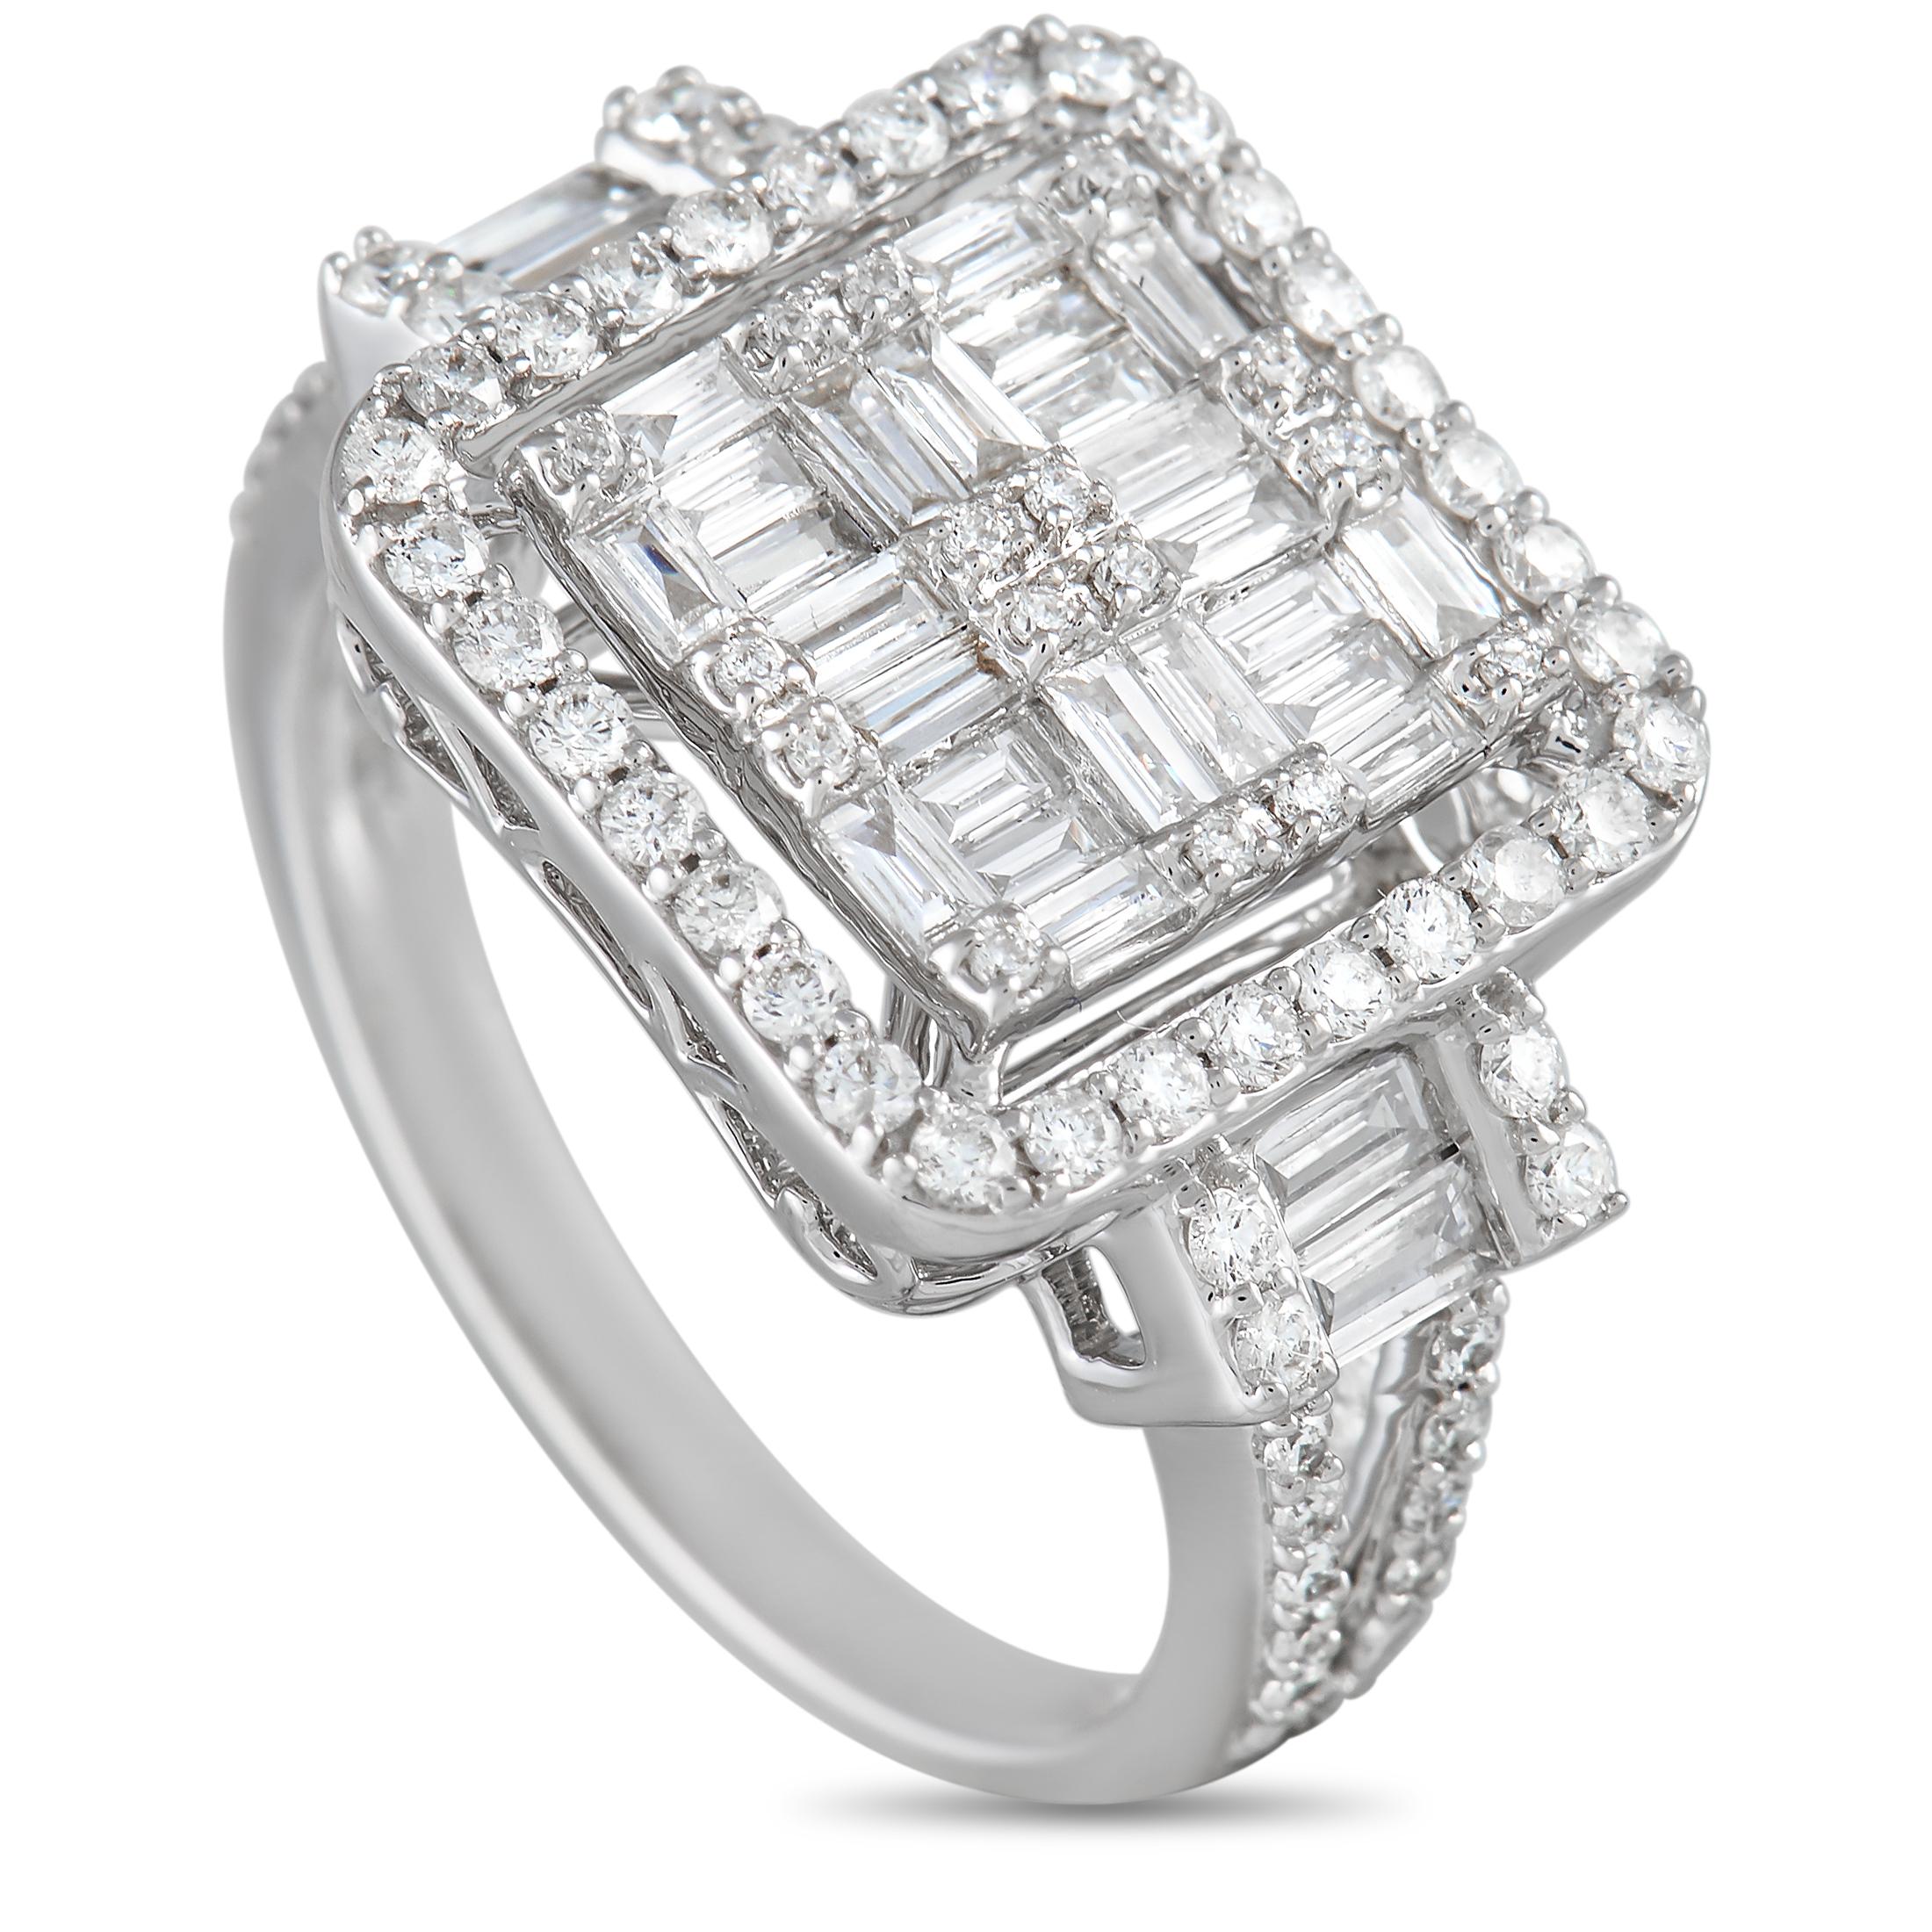 Sparkling diamonds totaling 1.20 carats cover this exceptionally stylish luxury ring. The setting is crafted from 14K White Gold and includes dynamic details that make it breathtaking from every angle. This timeless accessory features a 2mm wide